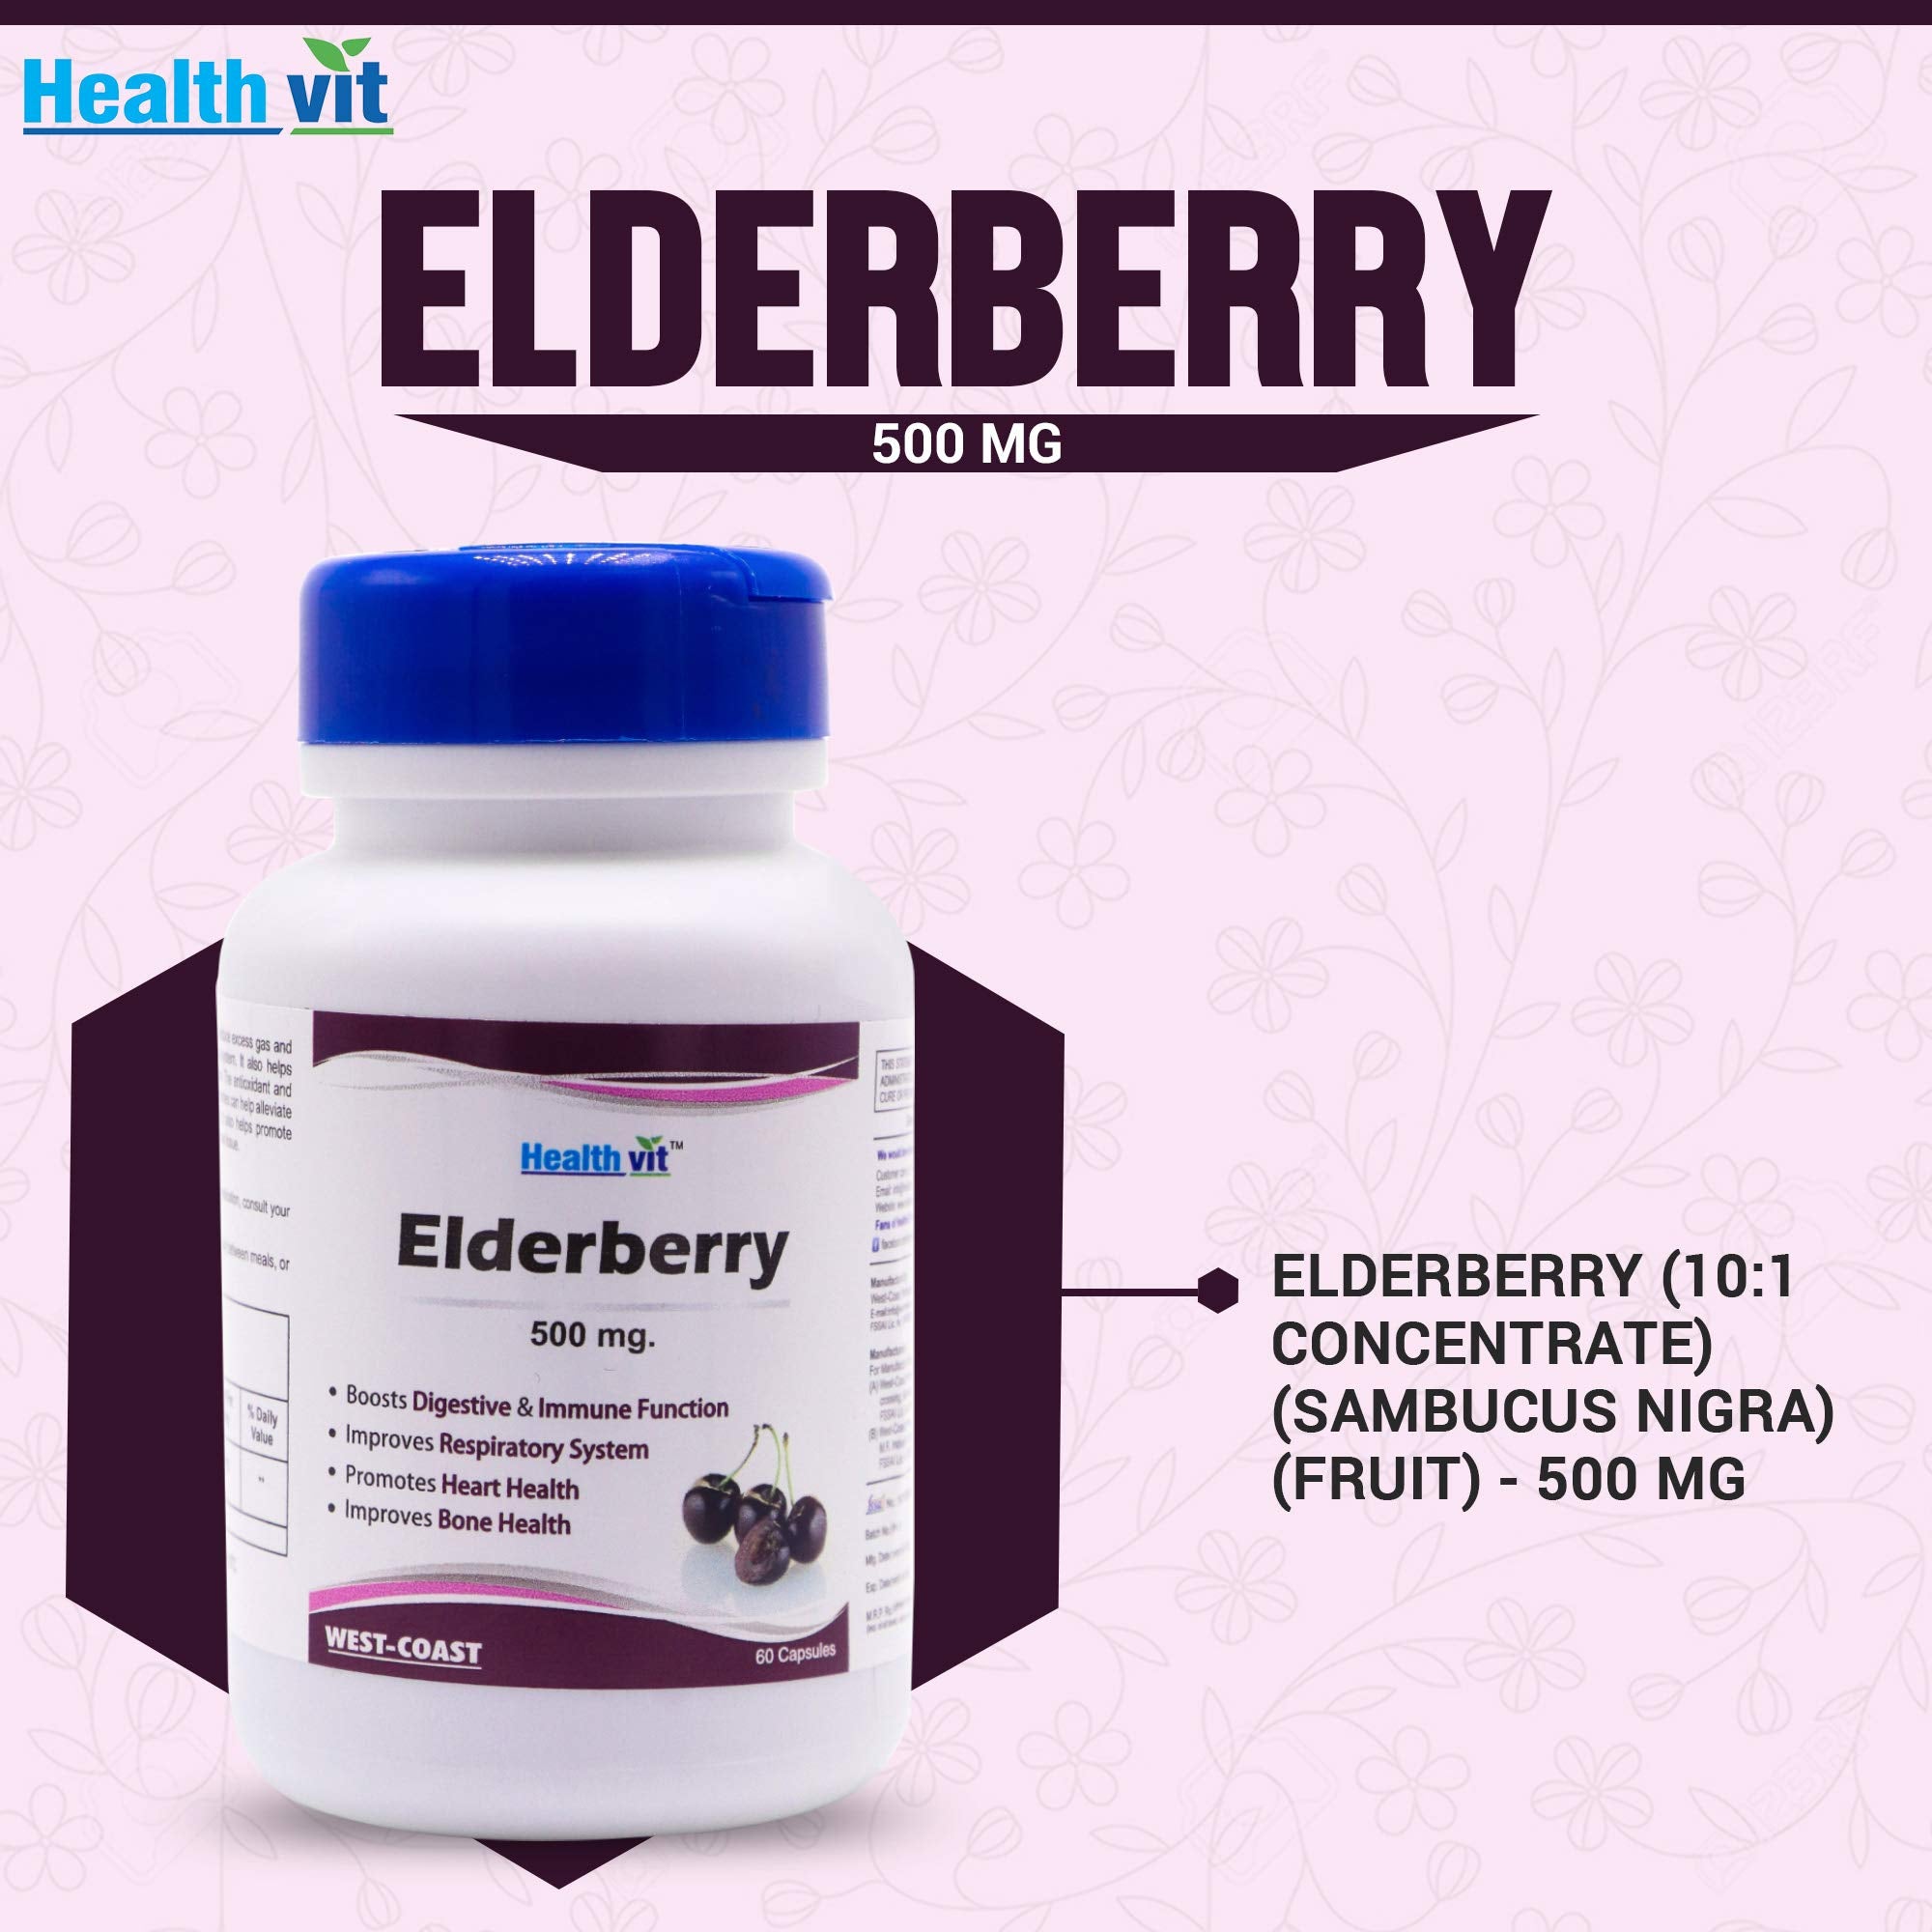 Healthvit Elderberry 500mg For Healthy Immune System | Maintain Health And Well Being | Improves Raspiratory System | Vegan And Gluten Free | 60 Capsules